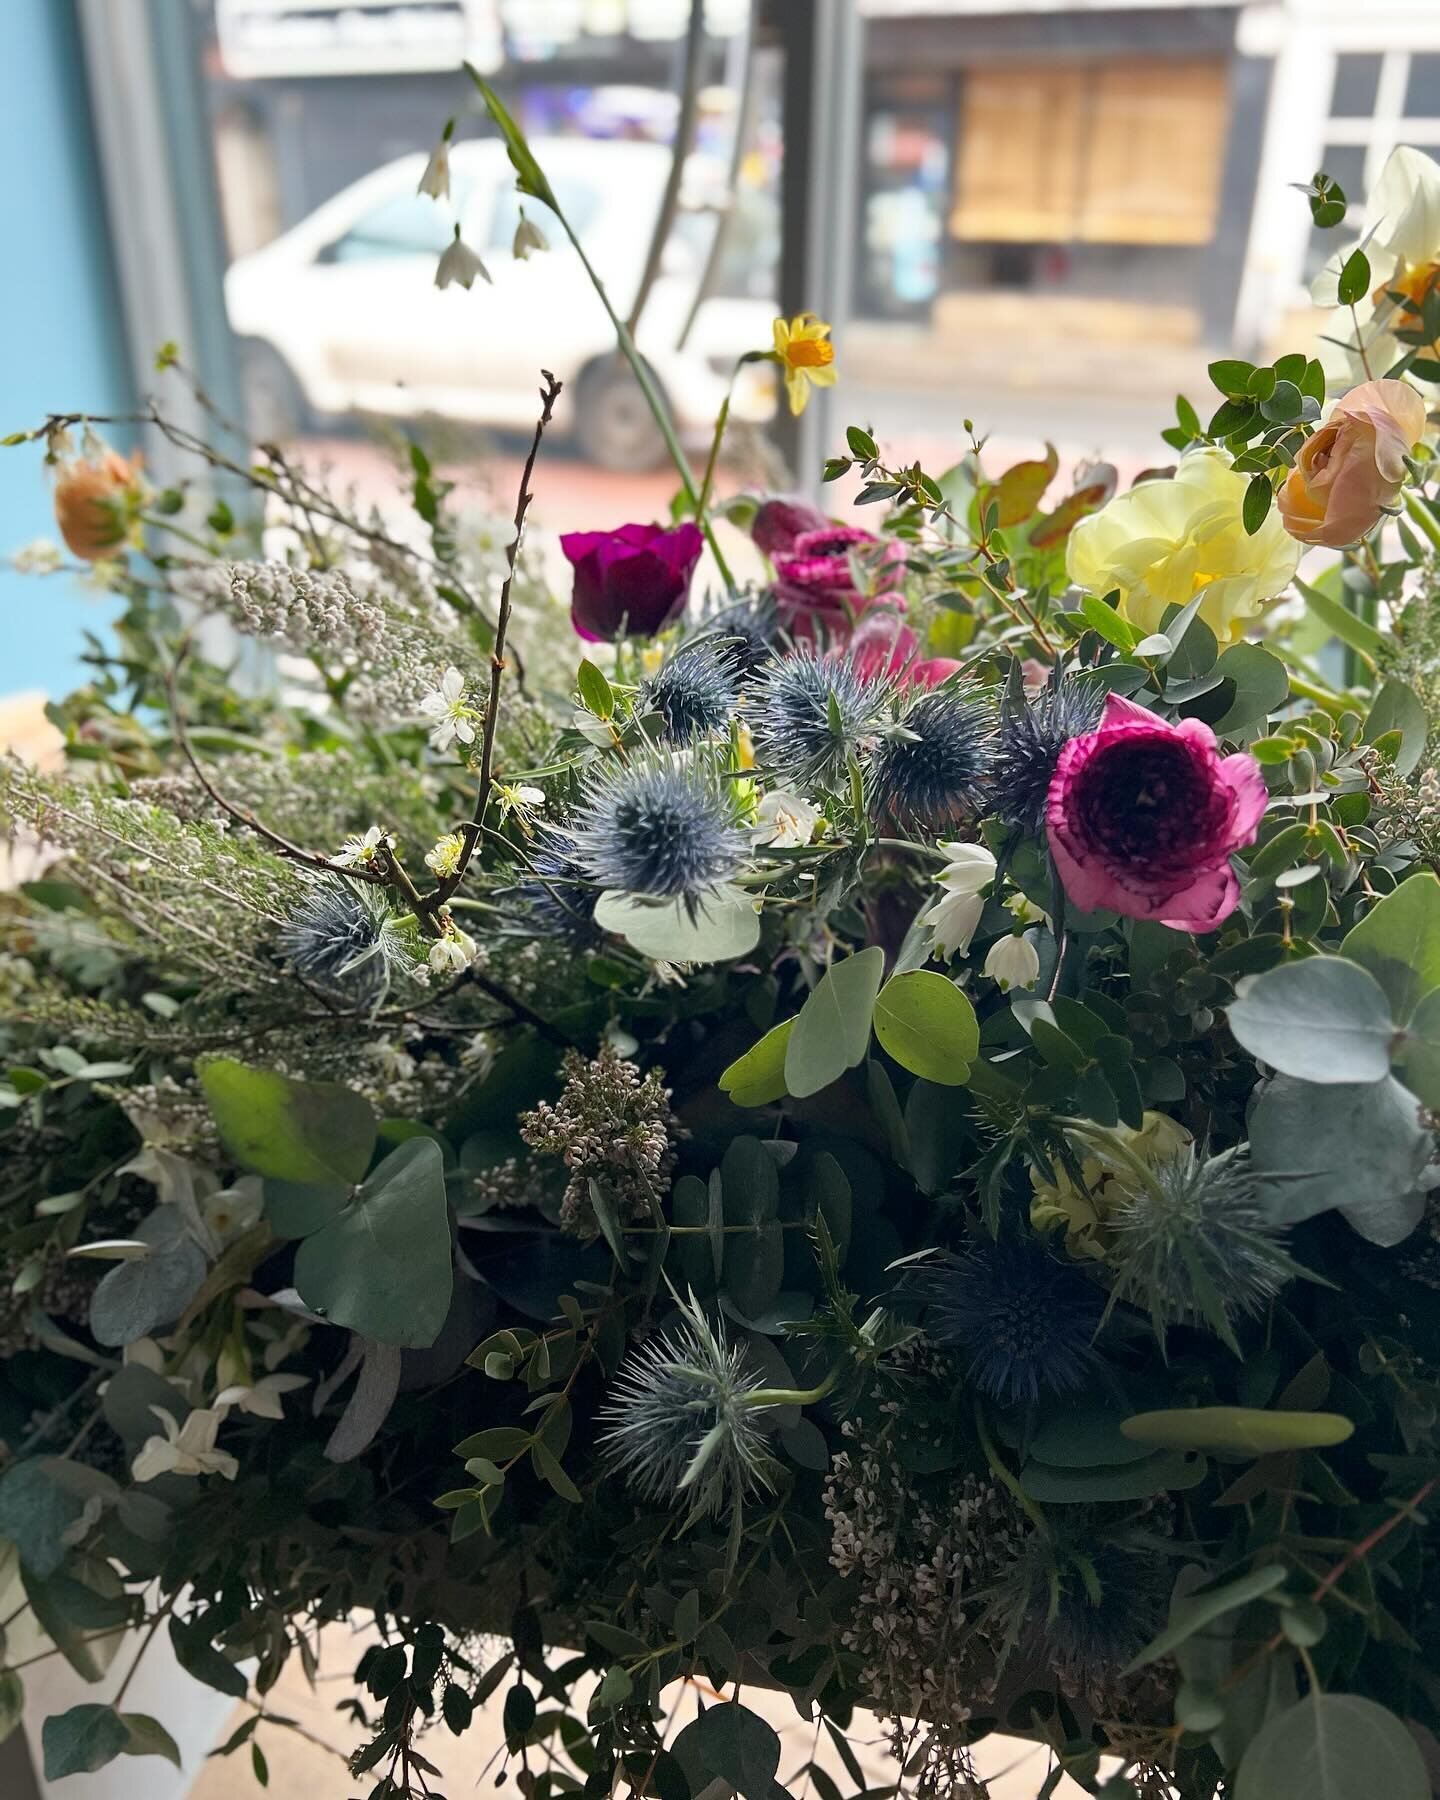 farewell flowers&hellip;
.
I&rsquo;m in the thick of it with work, juggling school hols, big flower fandangos, workshops, broken wifi and what has been the most annoying and protracted bit of building work to our house ever, however making someone&rs